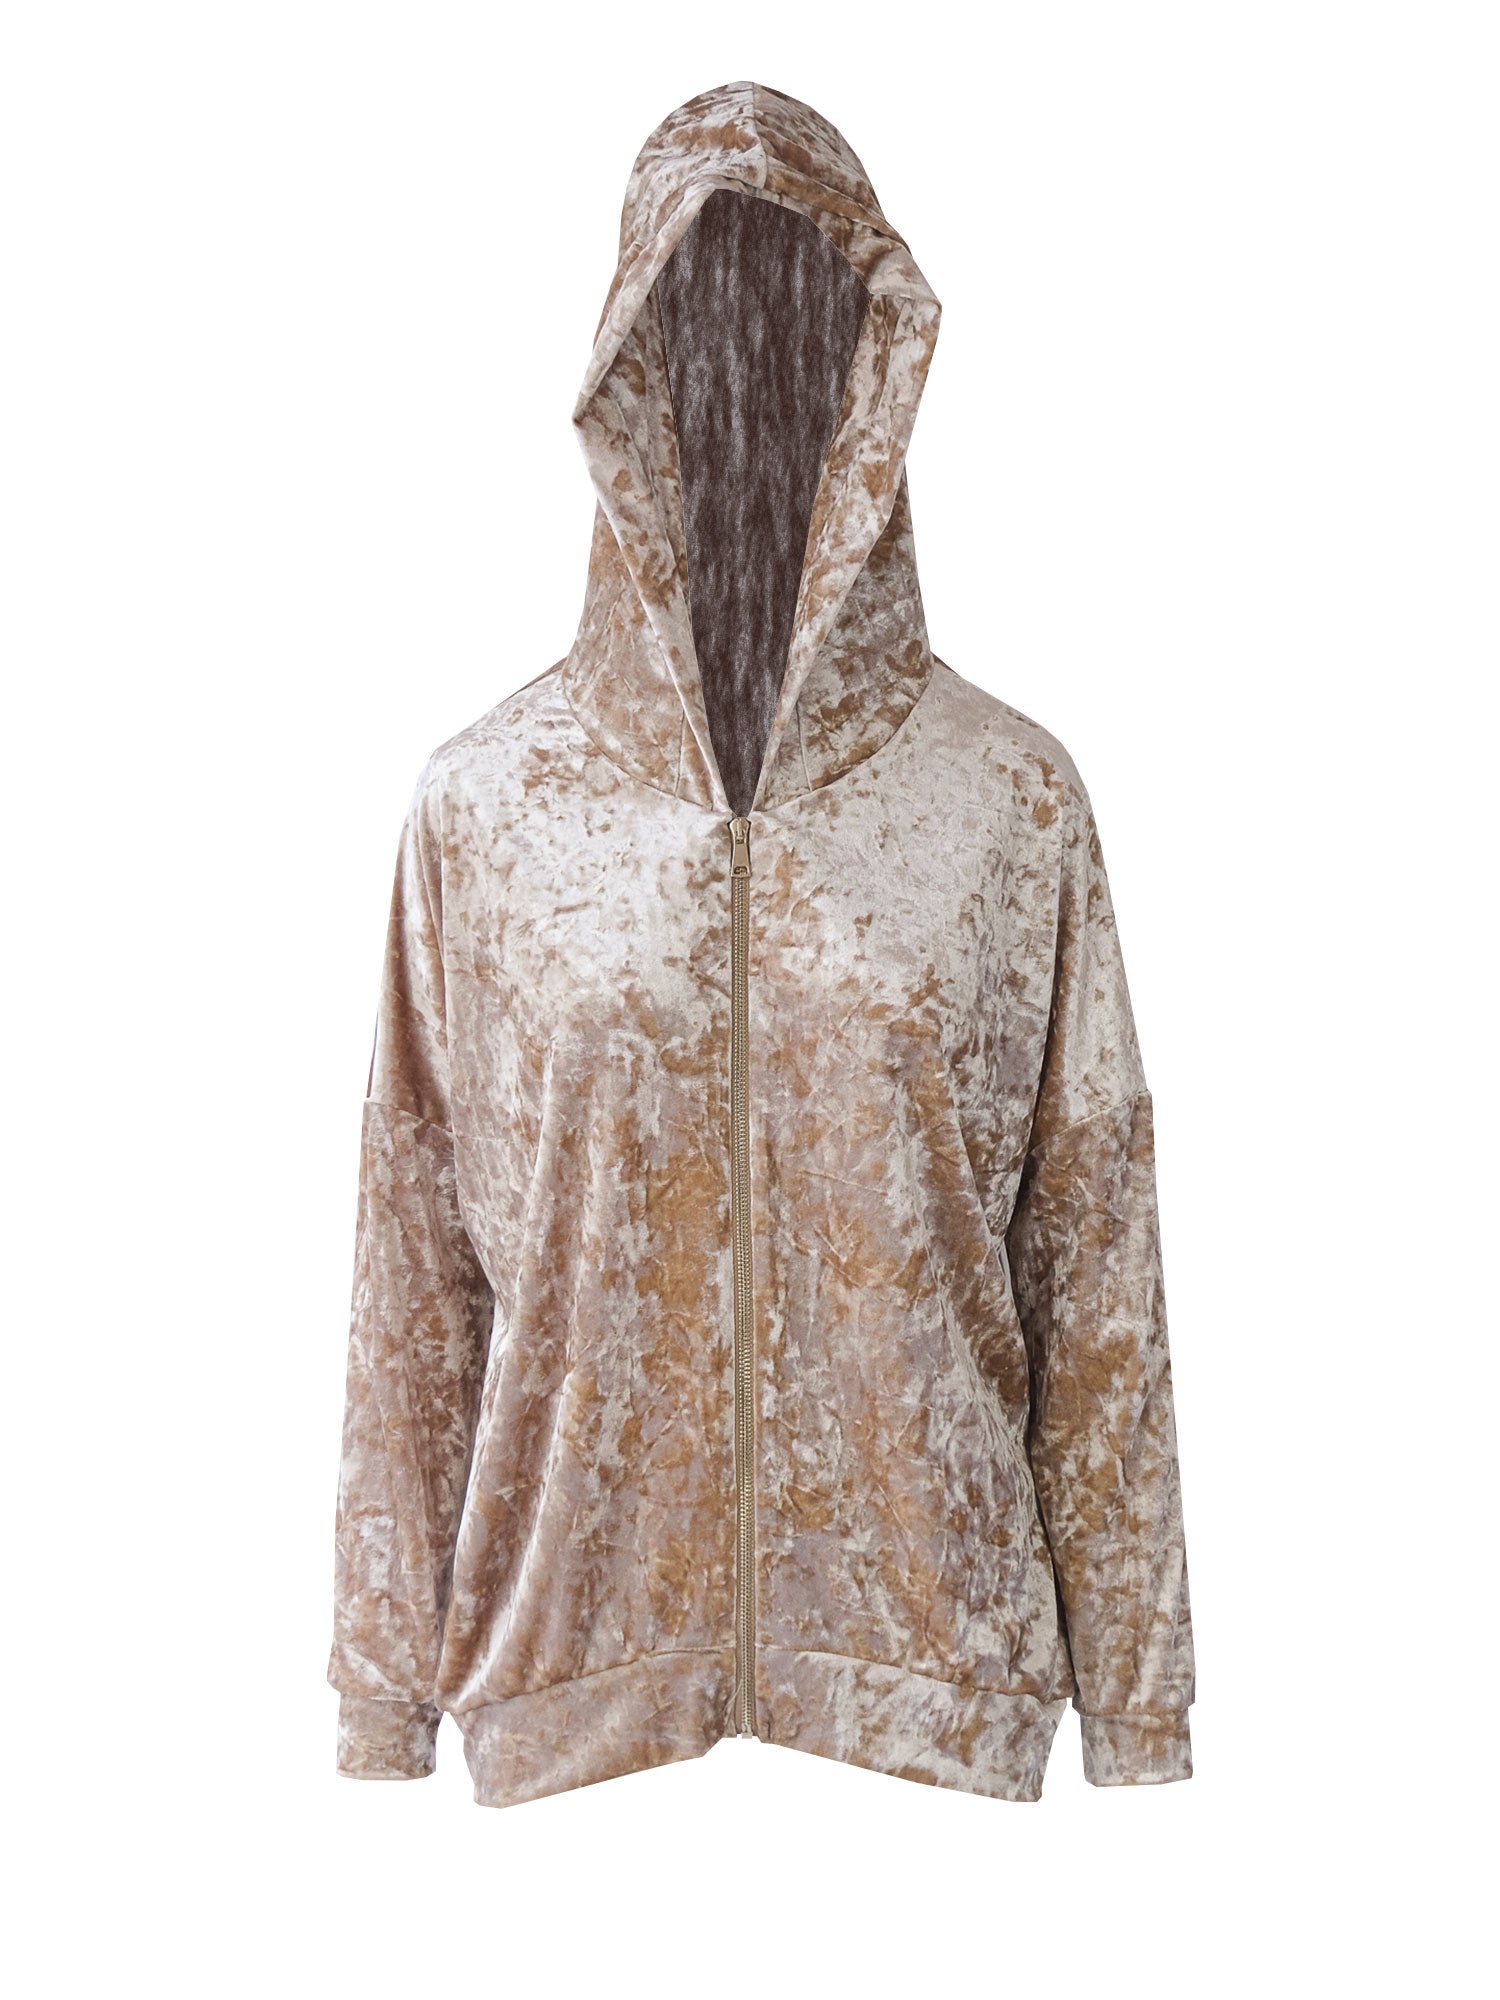 ADRIEN - hoodie with zip in champagne hammered chenille